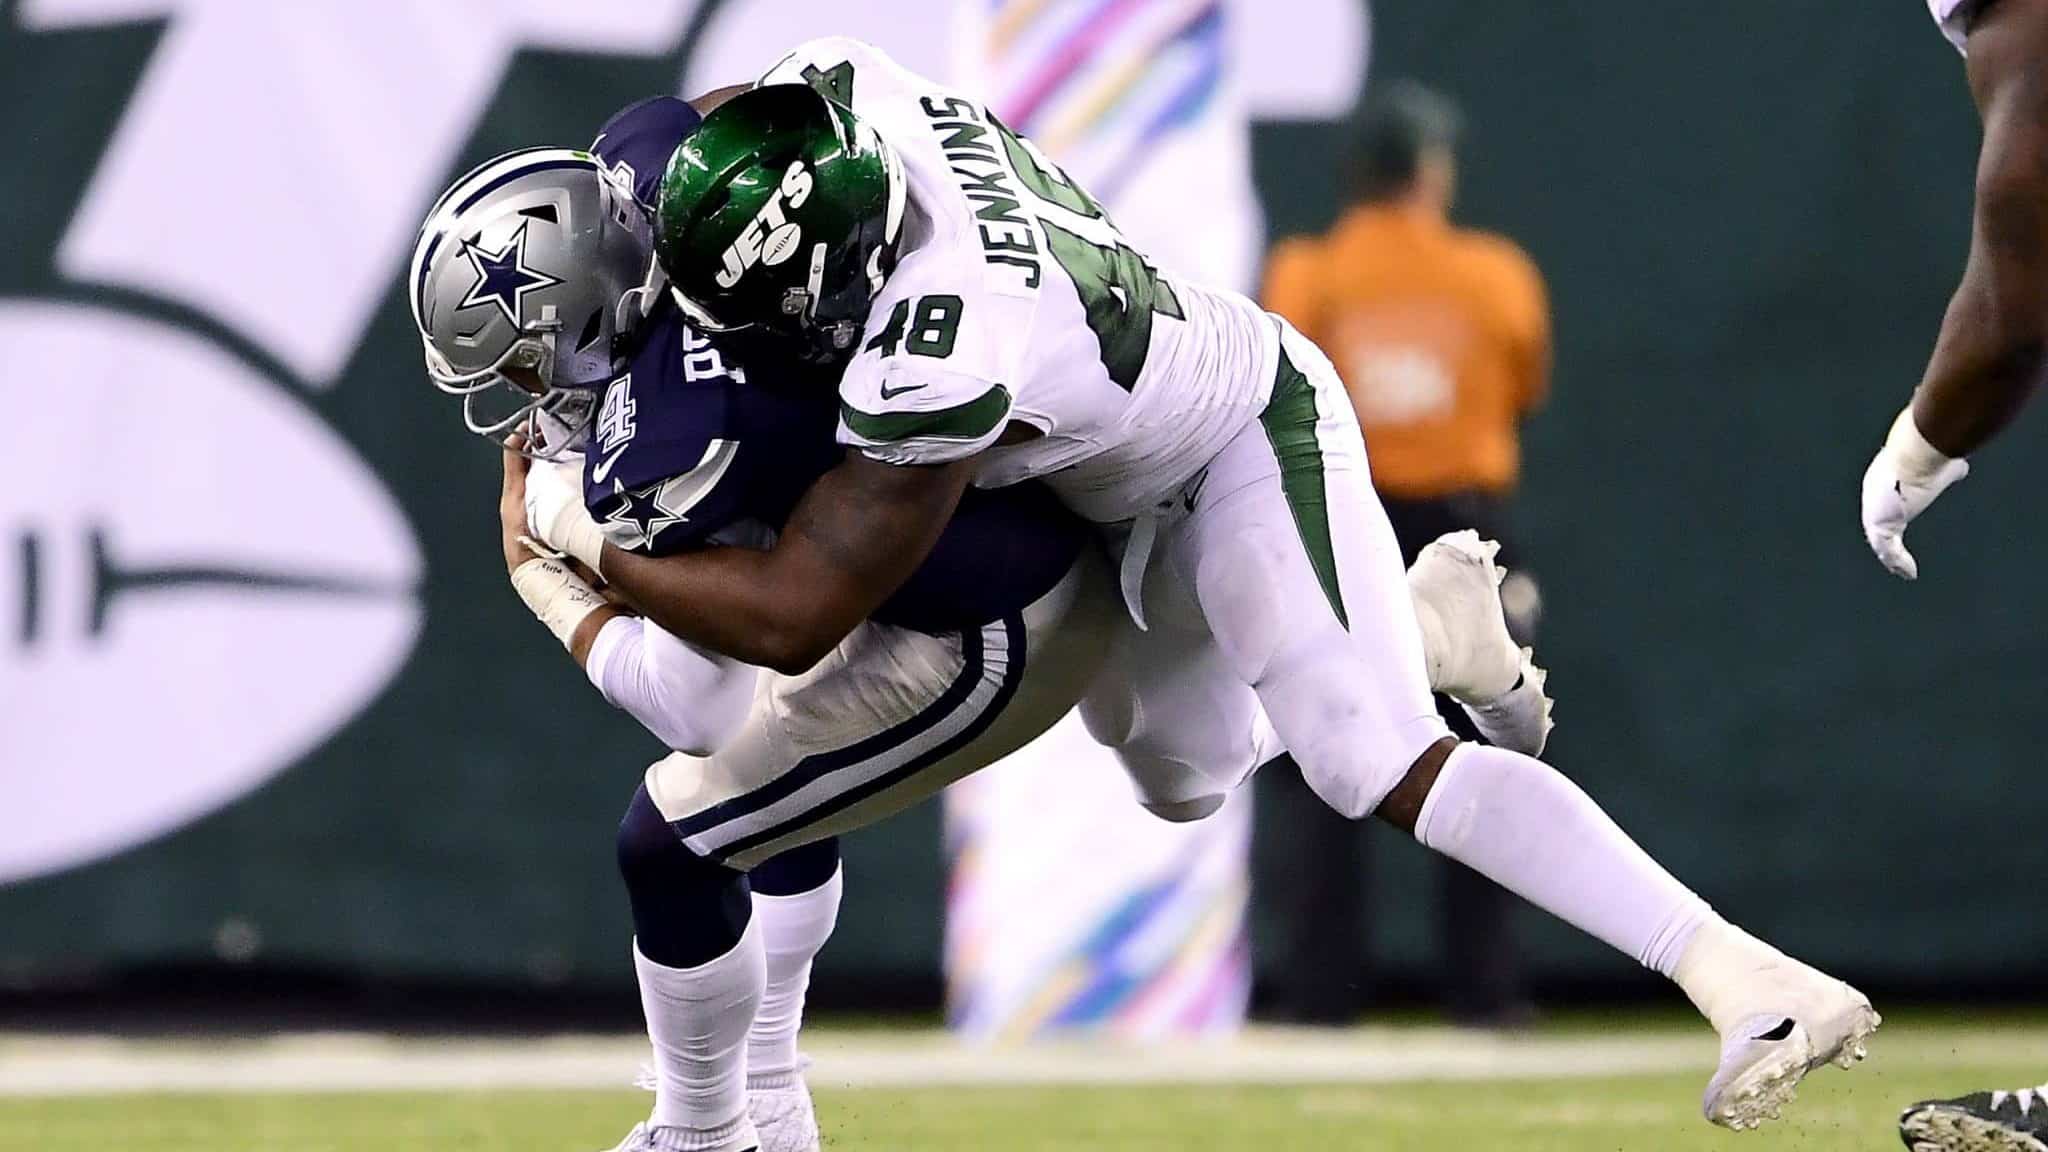 EAST RUTHERFORD, NEW JERSEY - OCTOBER 13: Dak Prescott #4 of the Dallas Cowboys is sacked by Jordan Jenkins #48 of the New York Jets during the fourth quarter at MetLife Stadium on October 13, 2019 in East Rutherford, New Jersey.